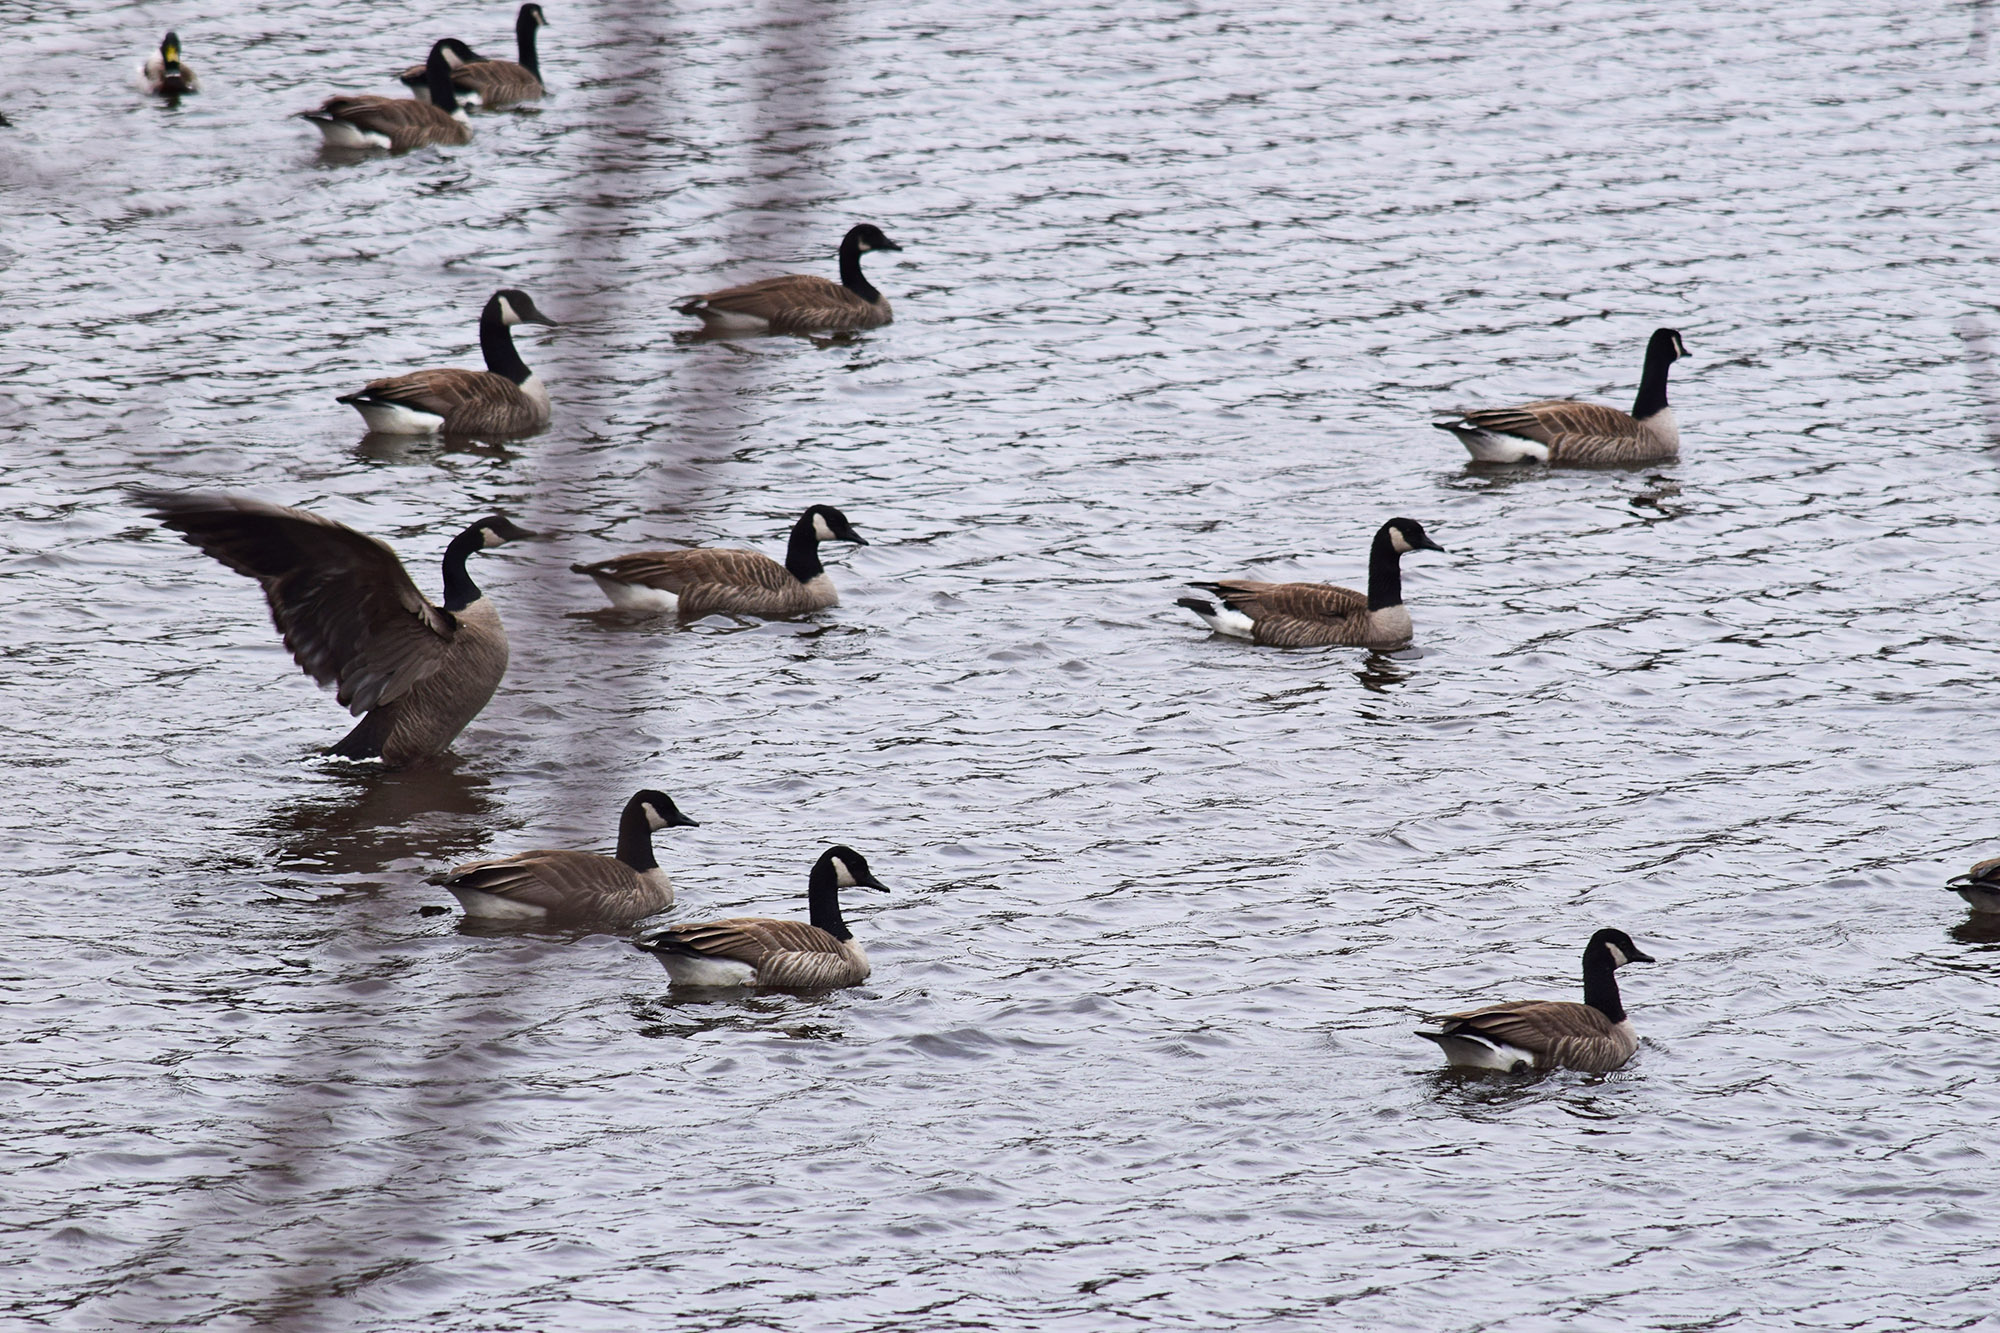 Mont Saint Hilaire Mountain Geese In the lake